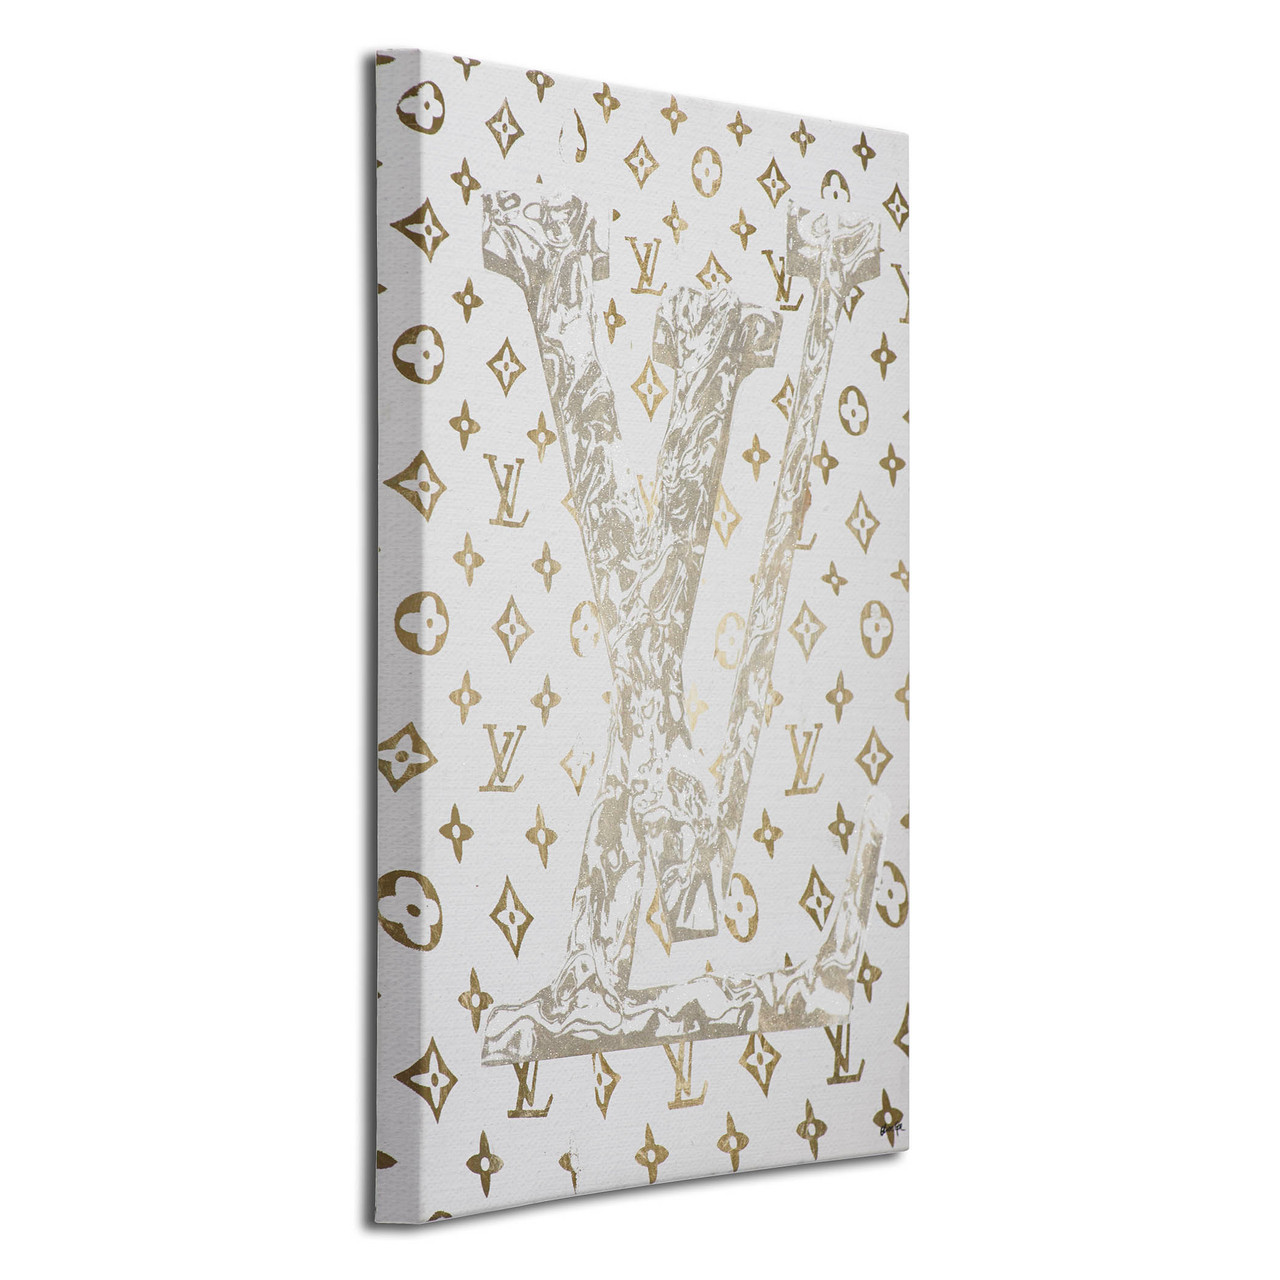 Framed Canvas Art - LV Store Pop by 5by5collective ( Fashion > Fashion Brands > Louis Vuitton art) - 26x26 in